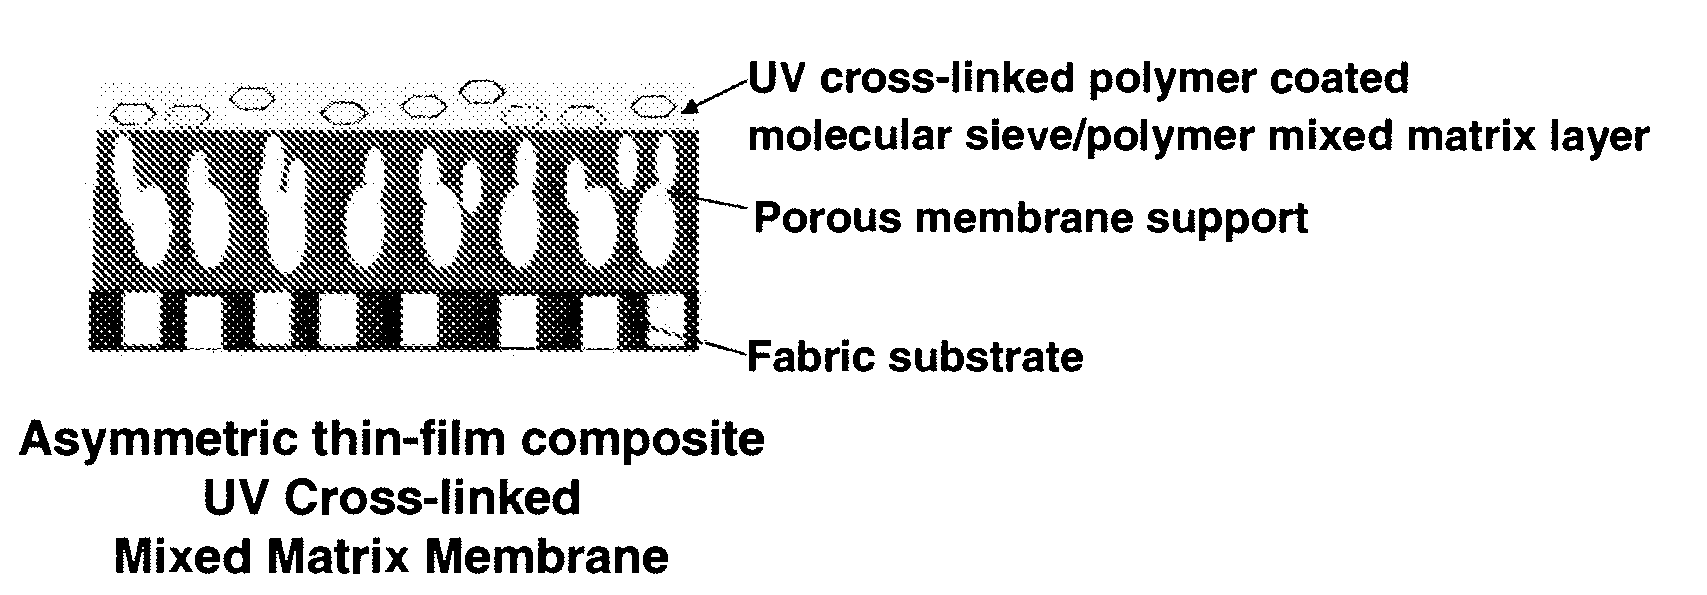 UV cross-linked polymer functionalized molecular sieve/polymer mixed matrix membranes for sulfur reduction